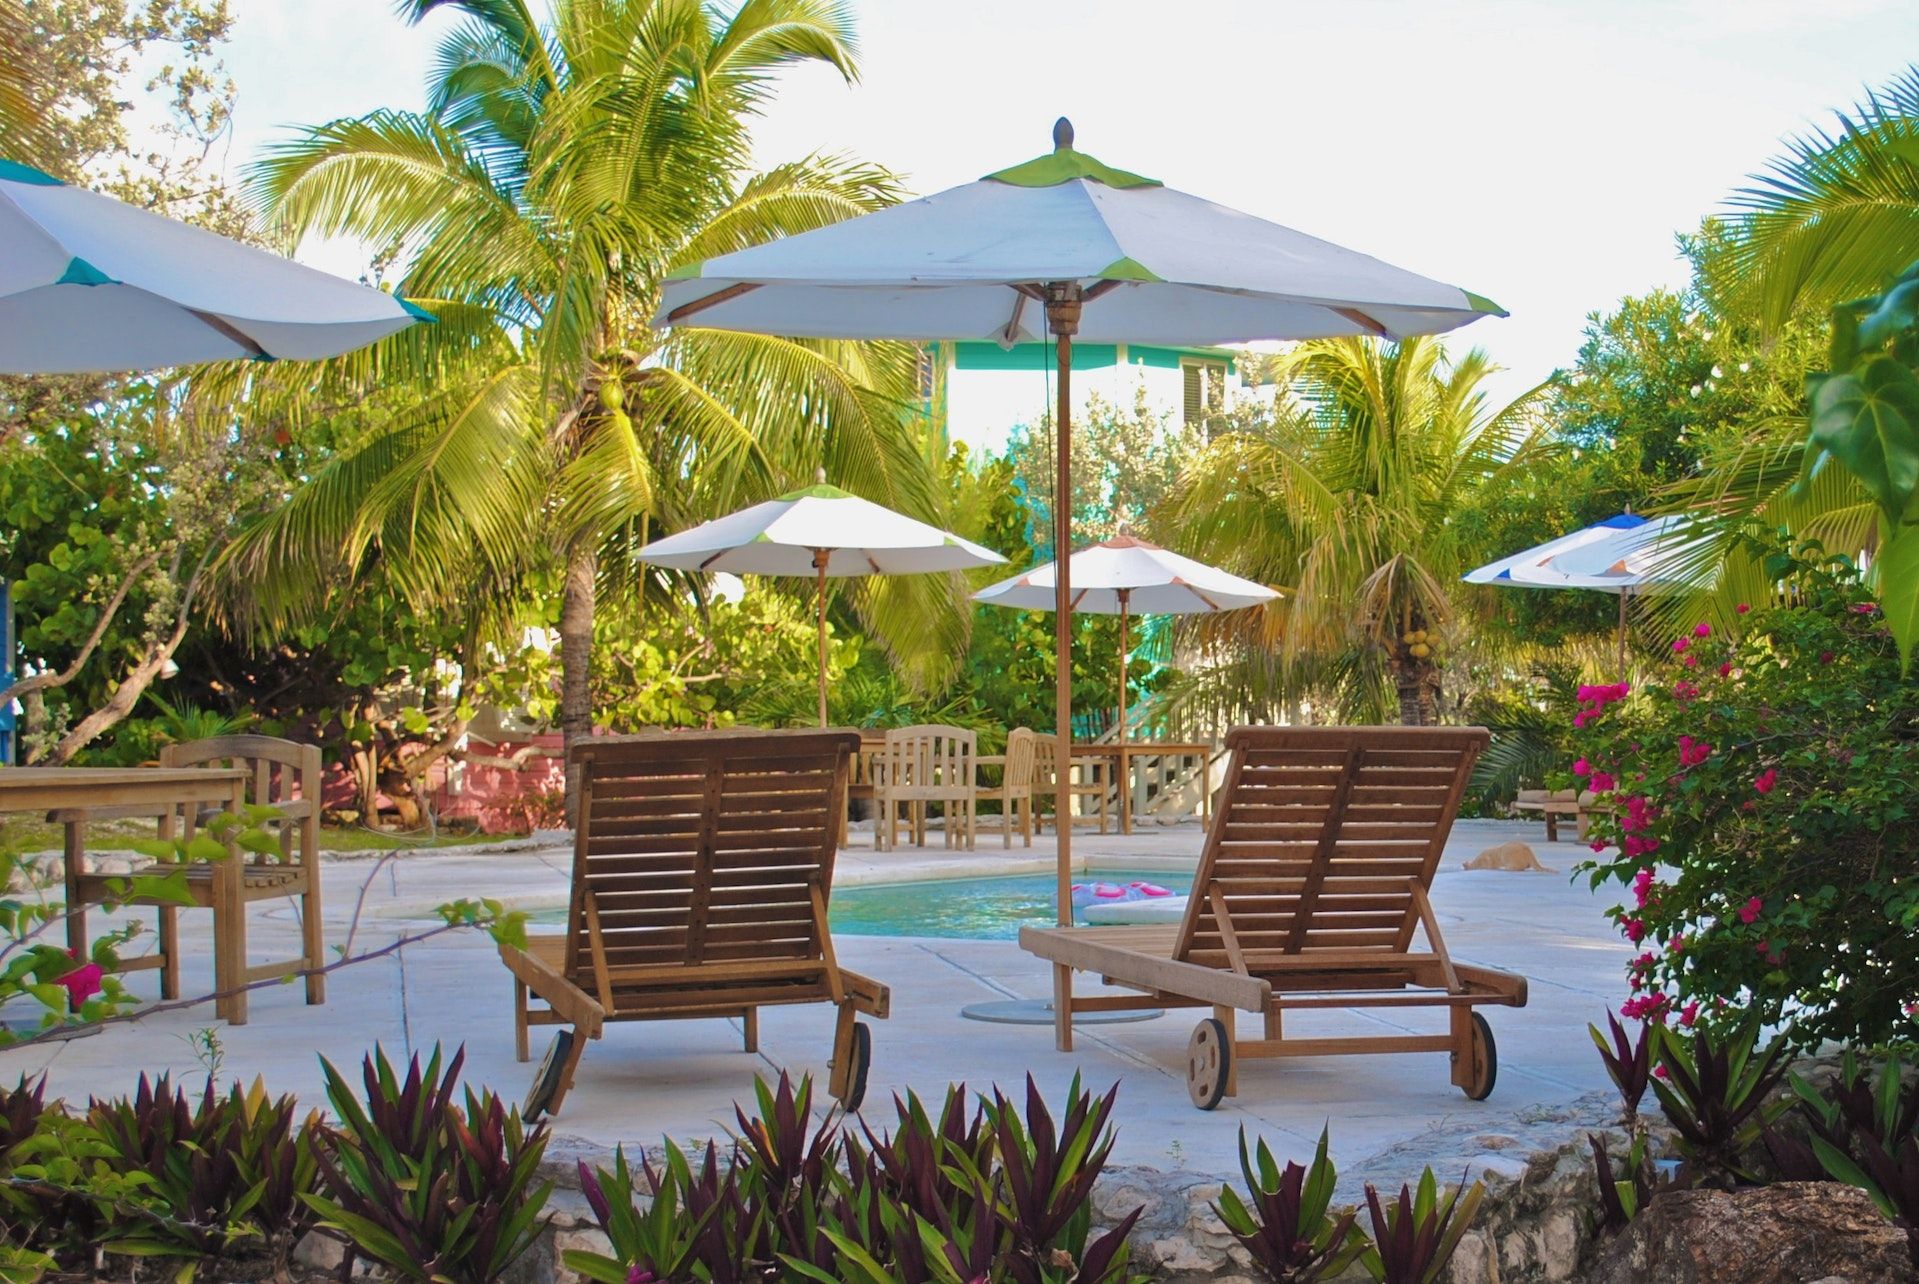 Lounge chairs at the pool in Staniel Cay Yacht Club